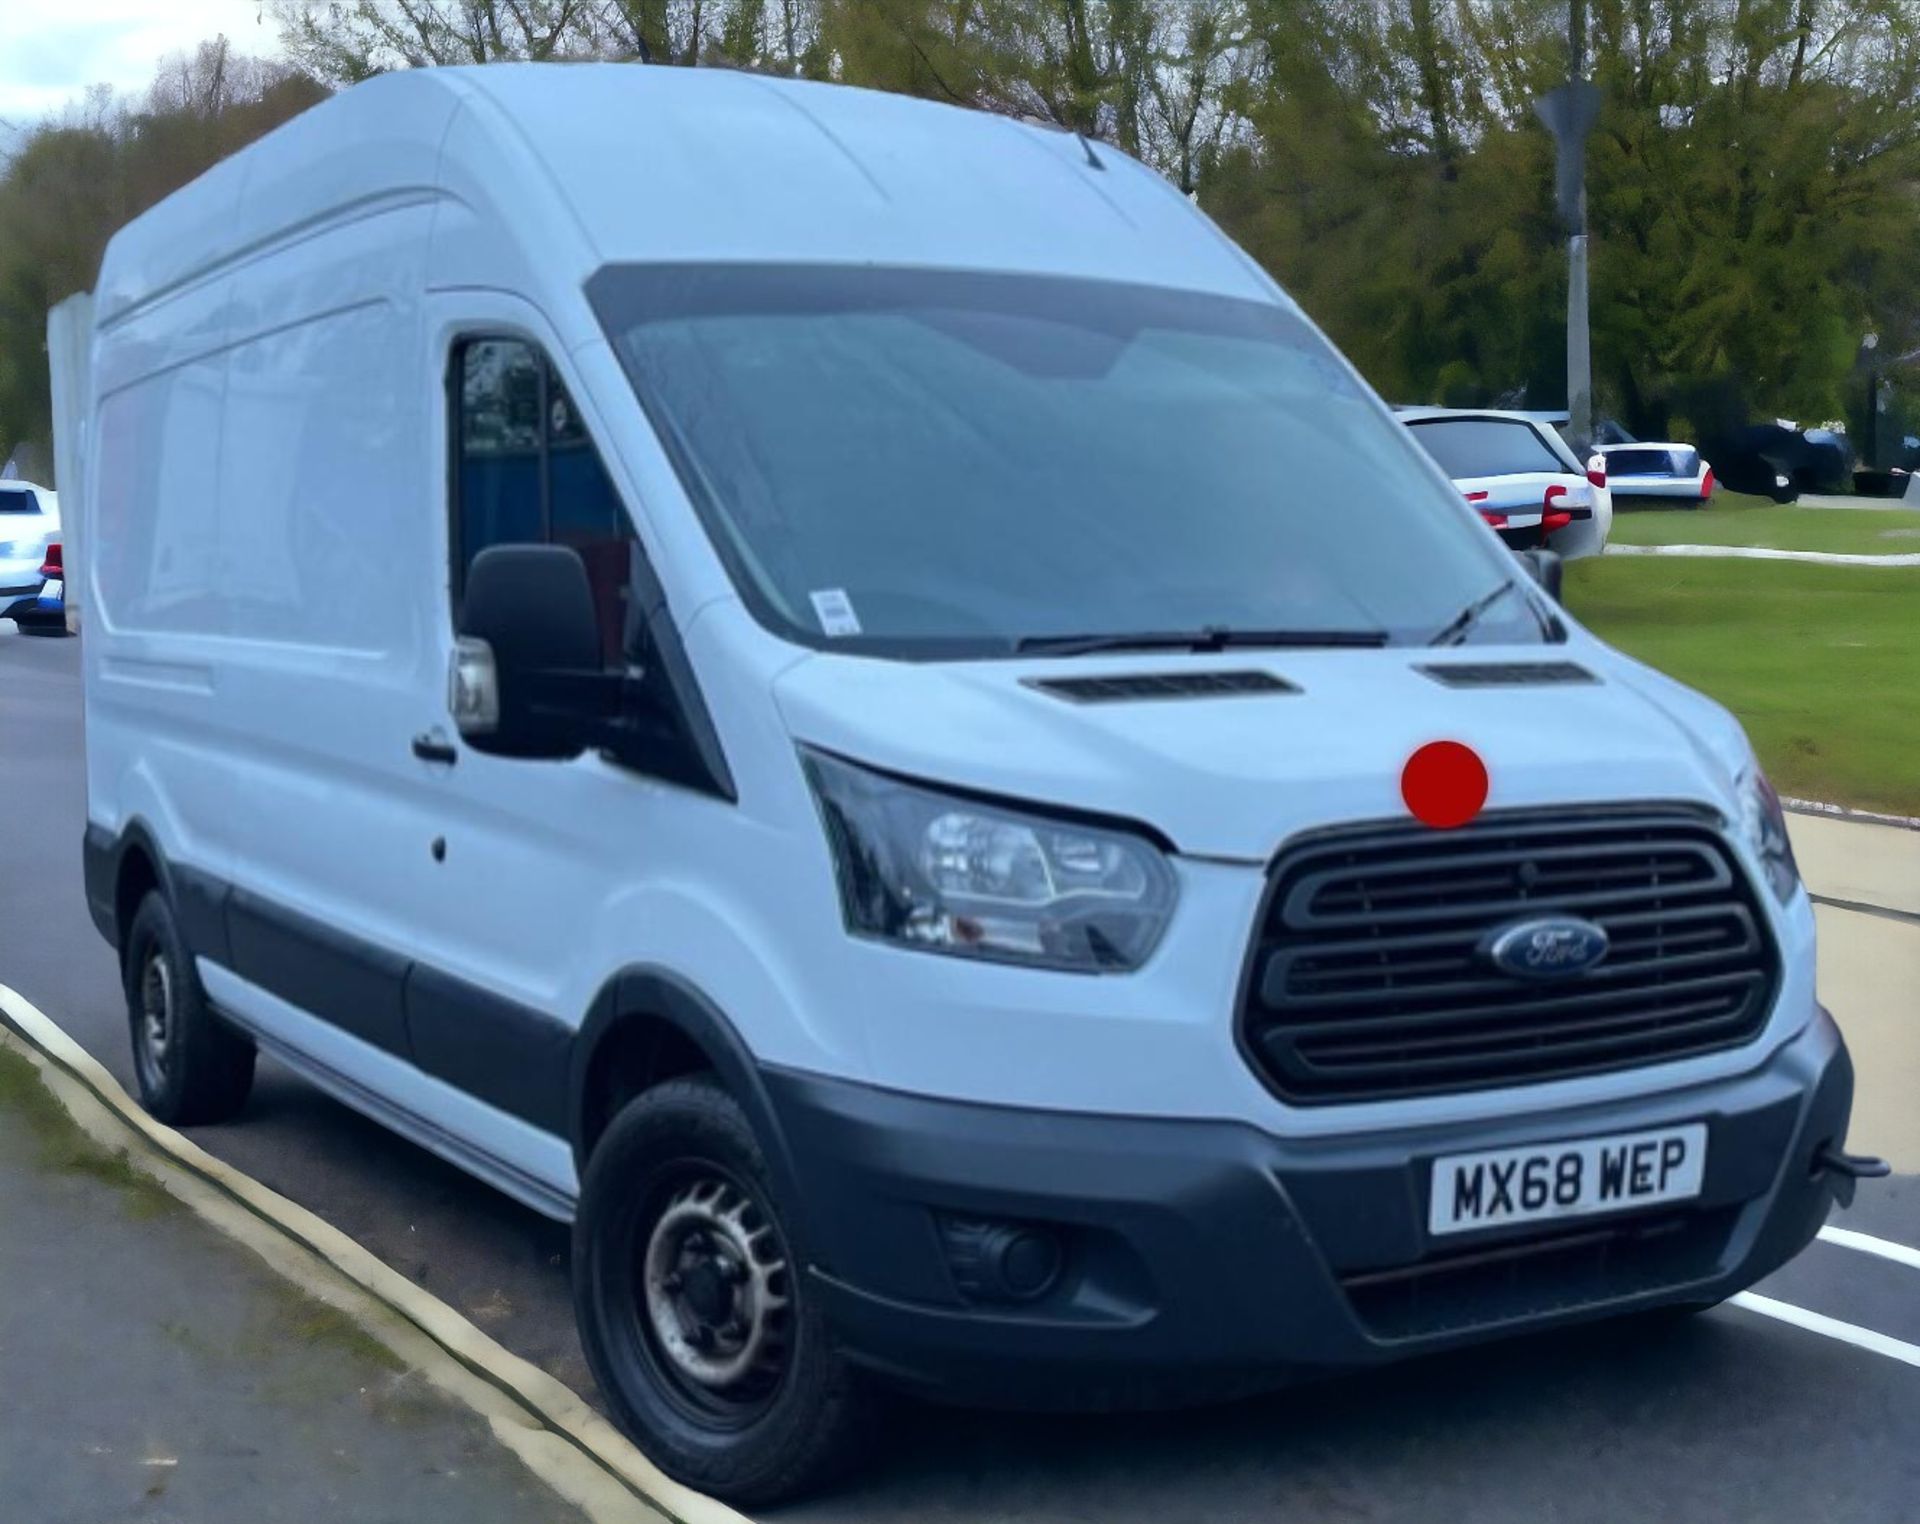 2018-68 REG FORD TRANSIT T350 RWD L3H2 -HPI CLEAR - READY FOR WORK!